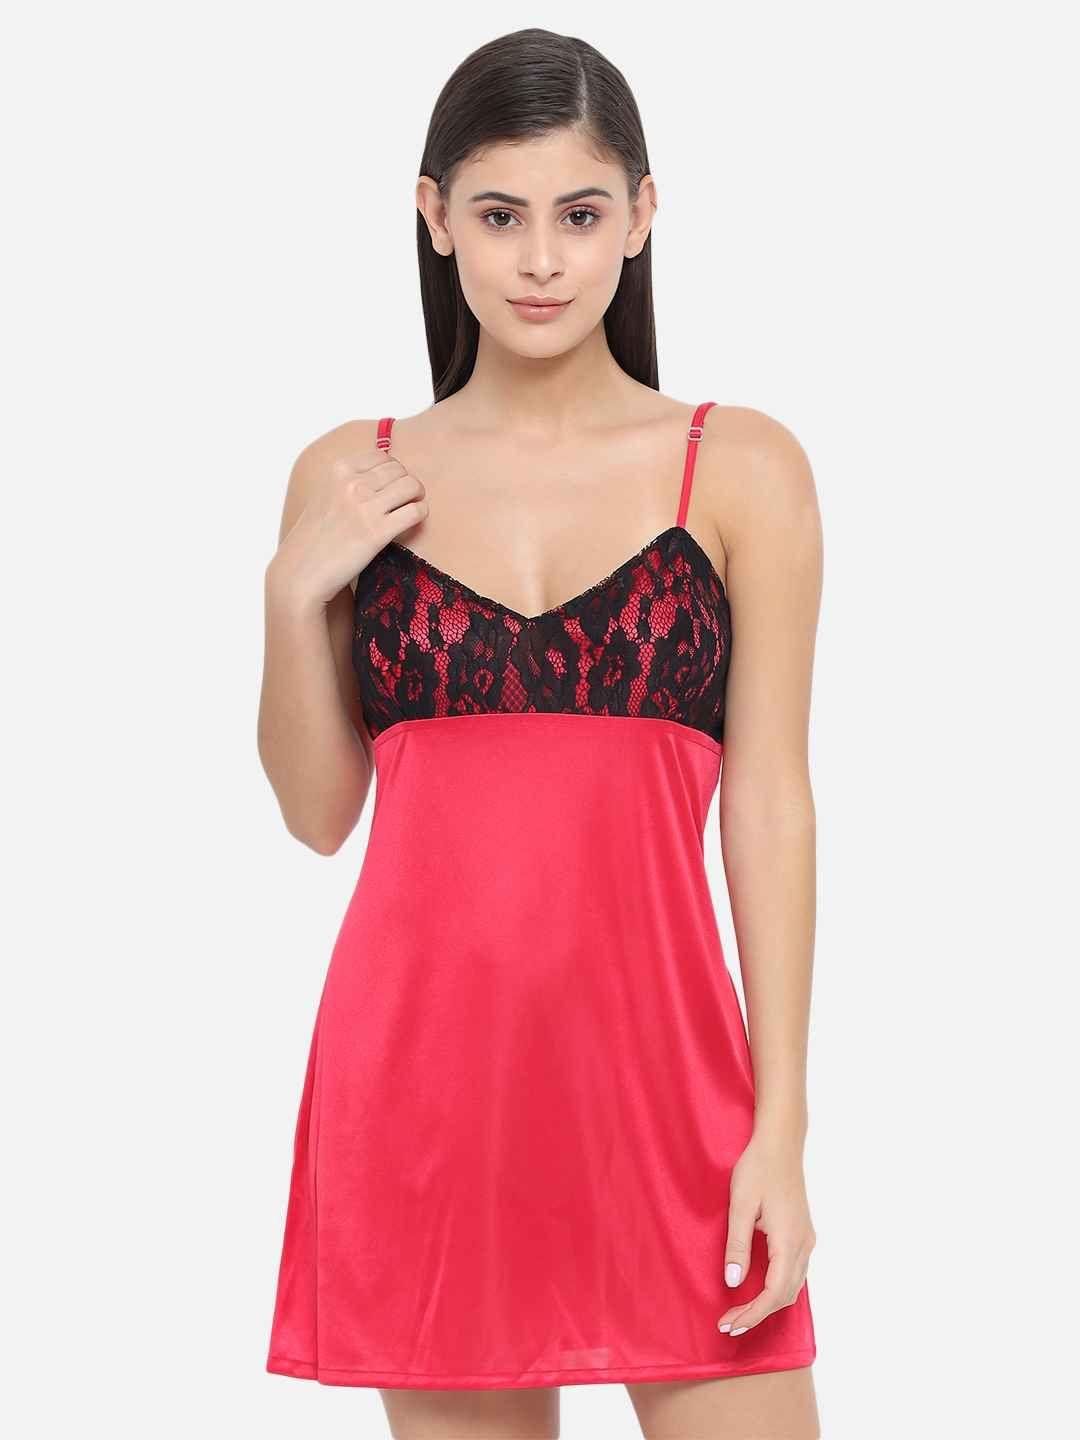 Buy 16 Rings Babydoll Dress for Women | Honeymoon Dress | Sexy Lingerie  (Red, Acrylic Blend) at Amazon.in